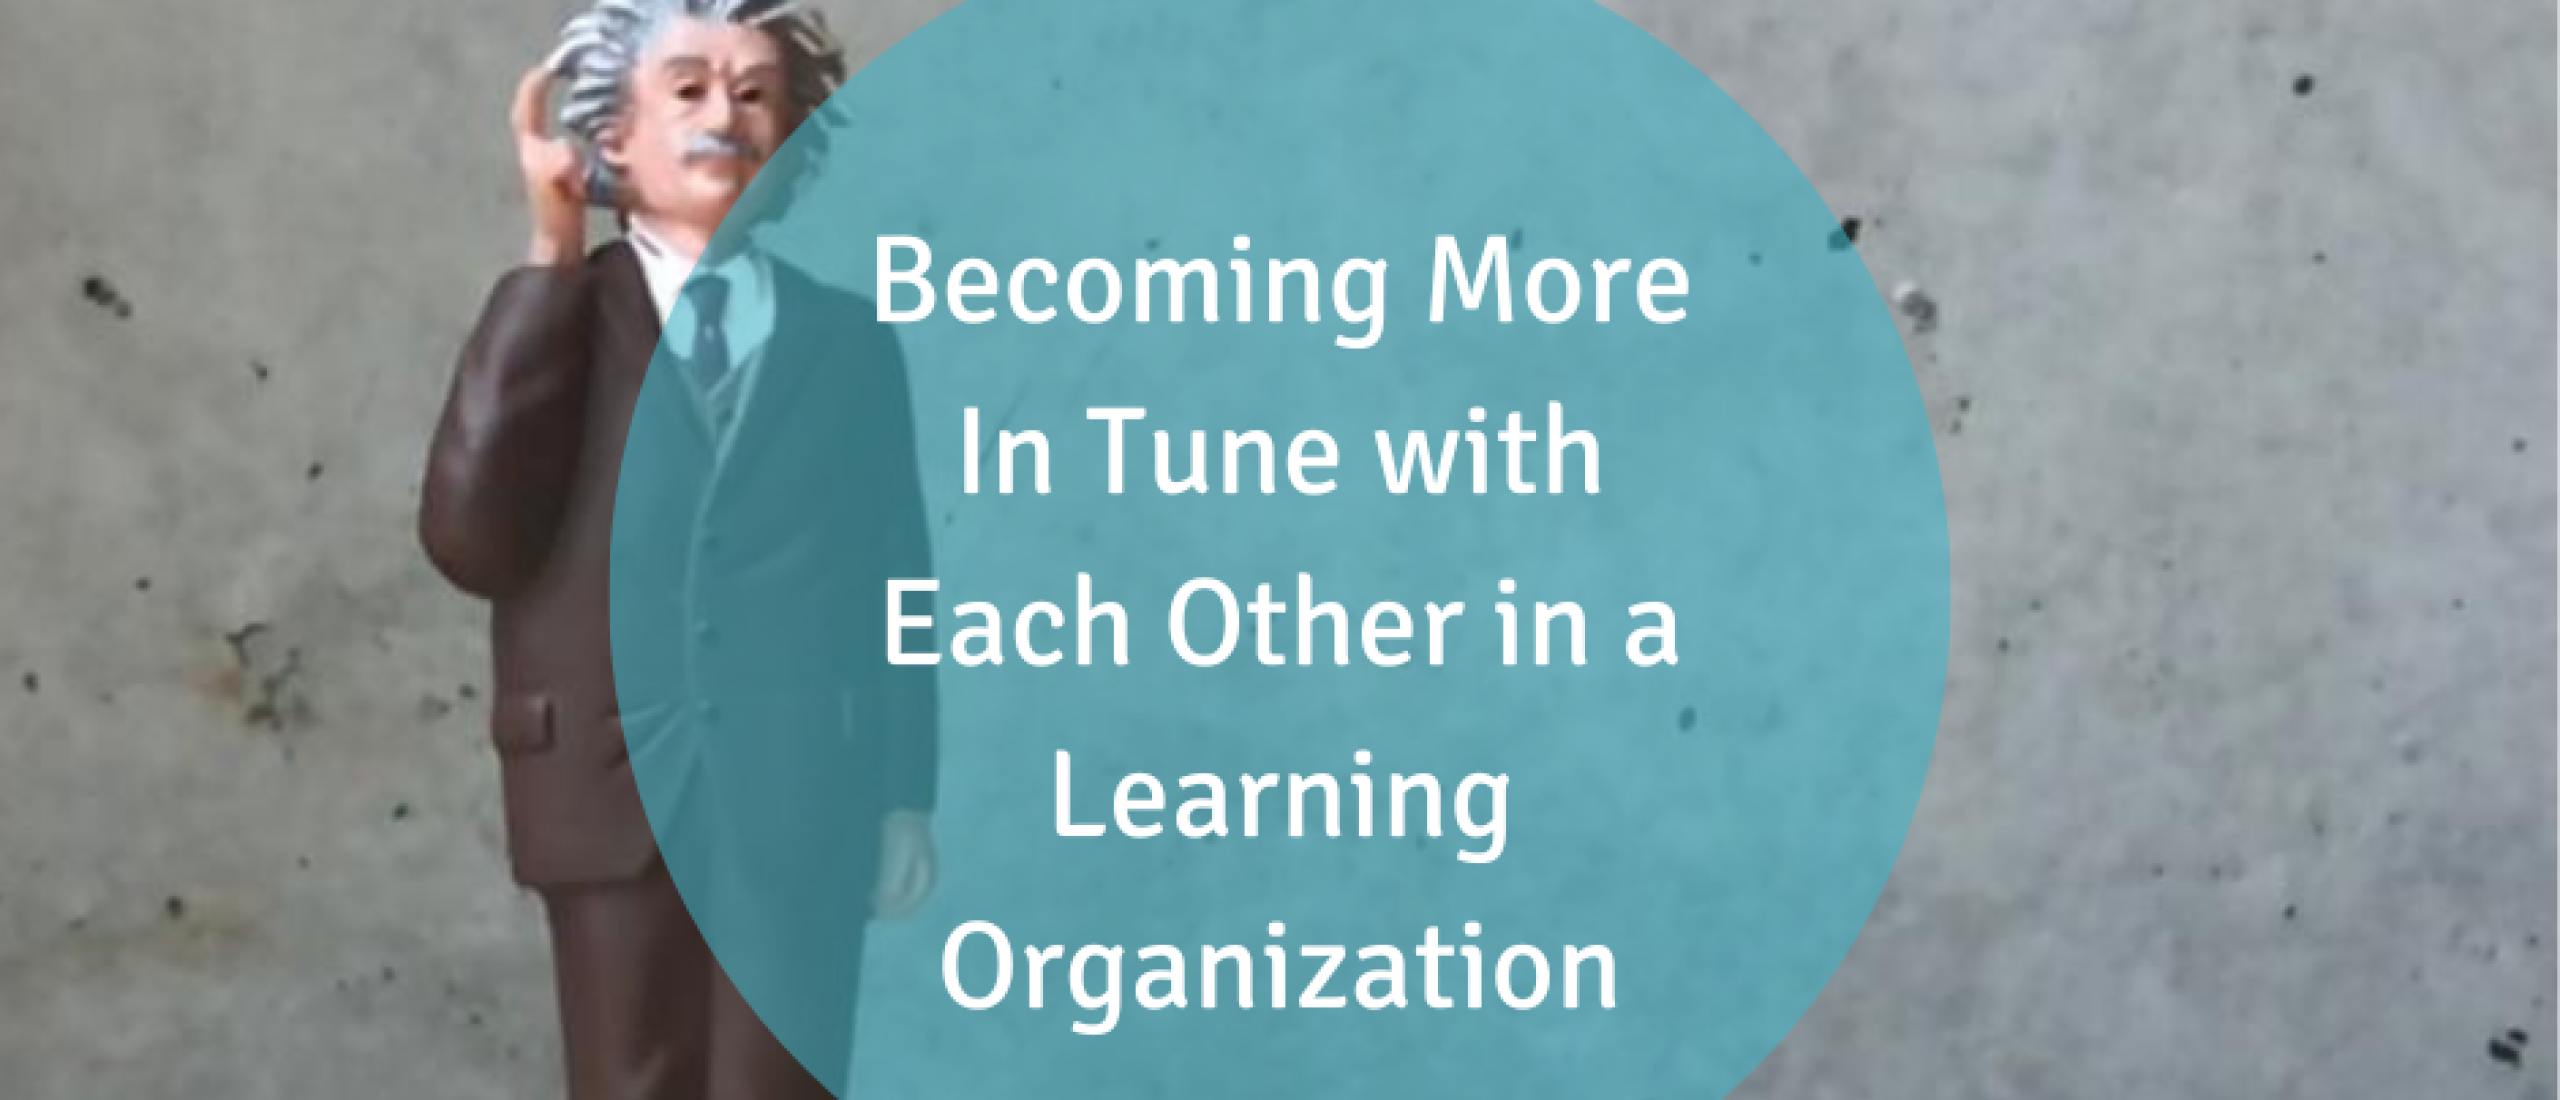 Becoming More In Tune with Each Other in a Learning Organization